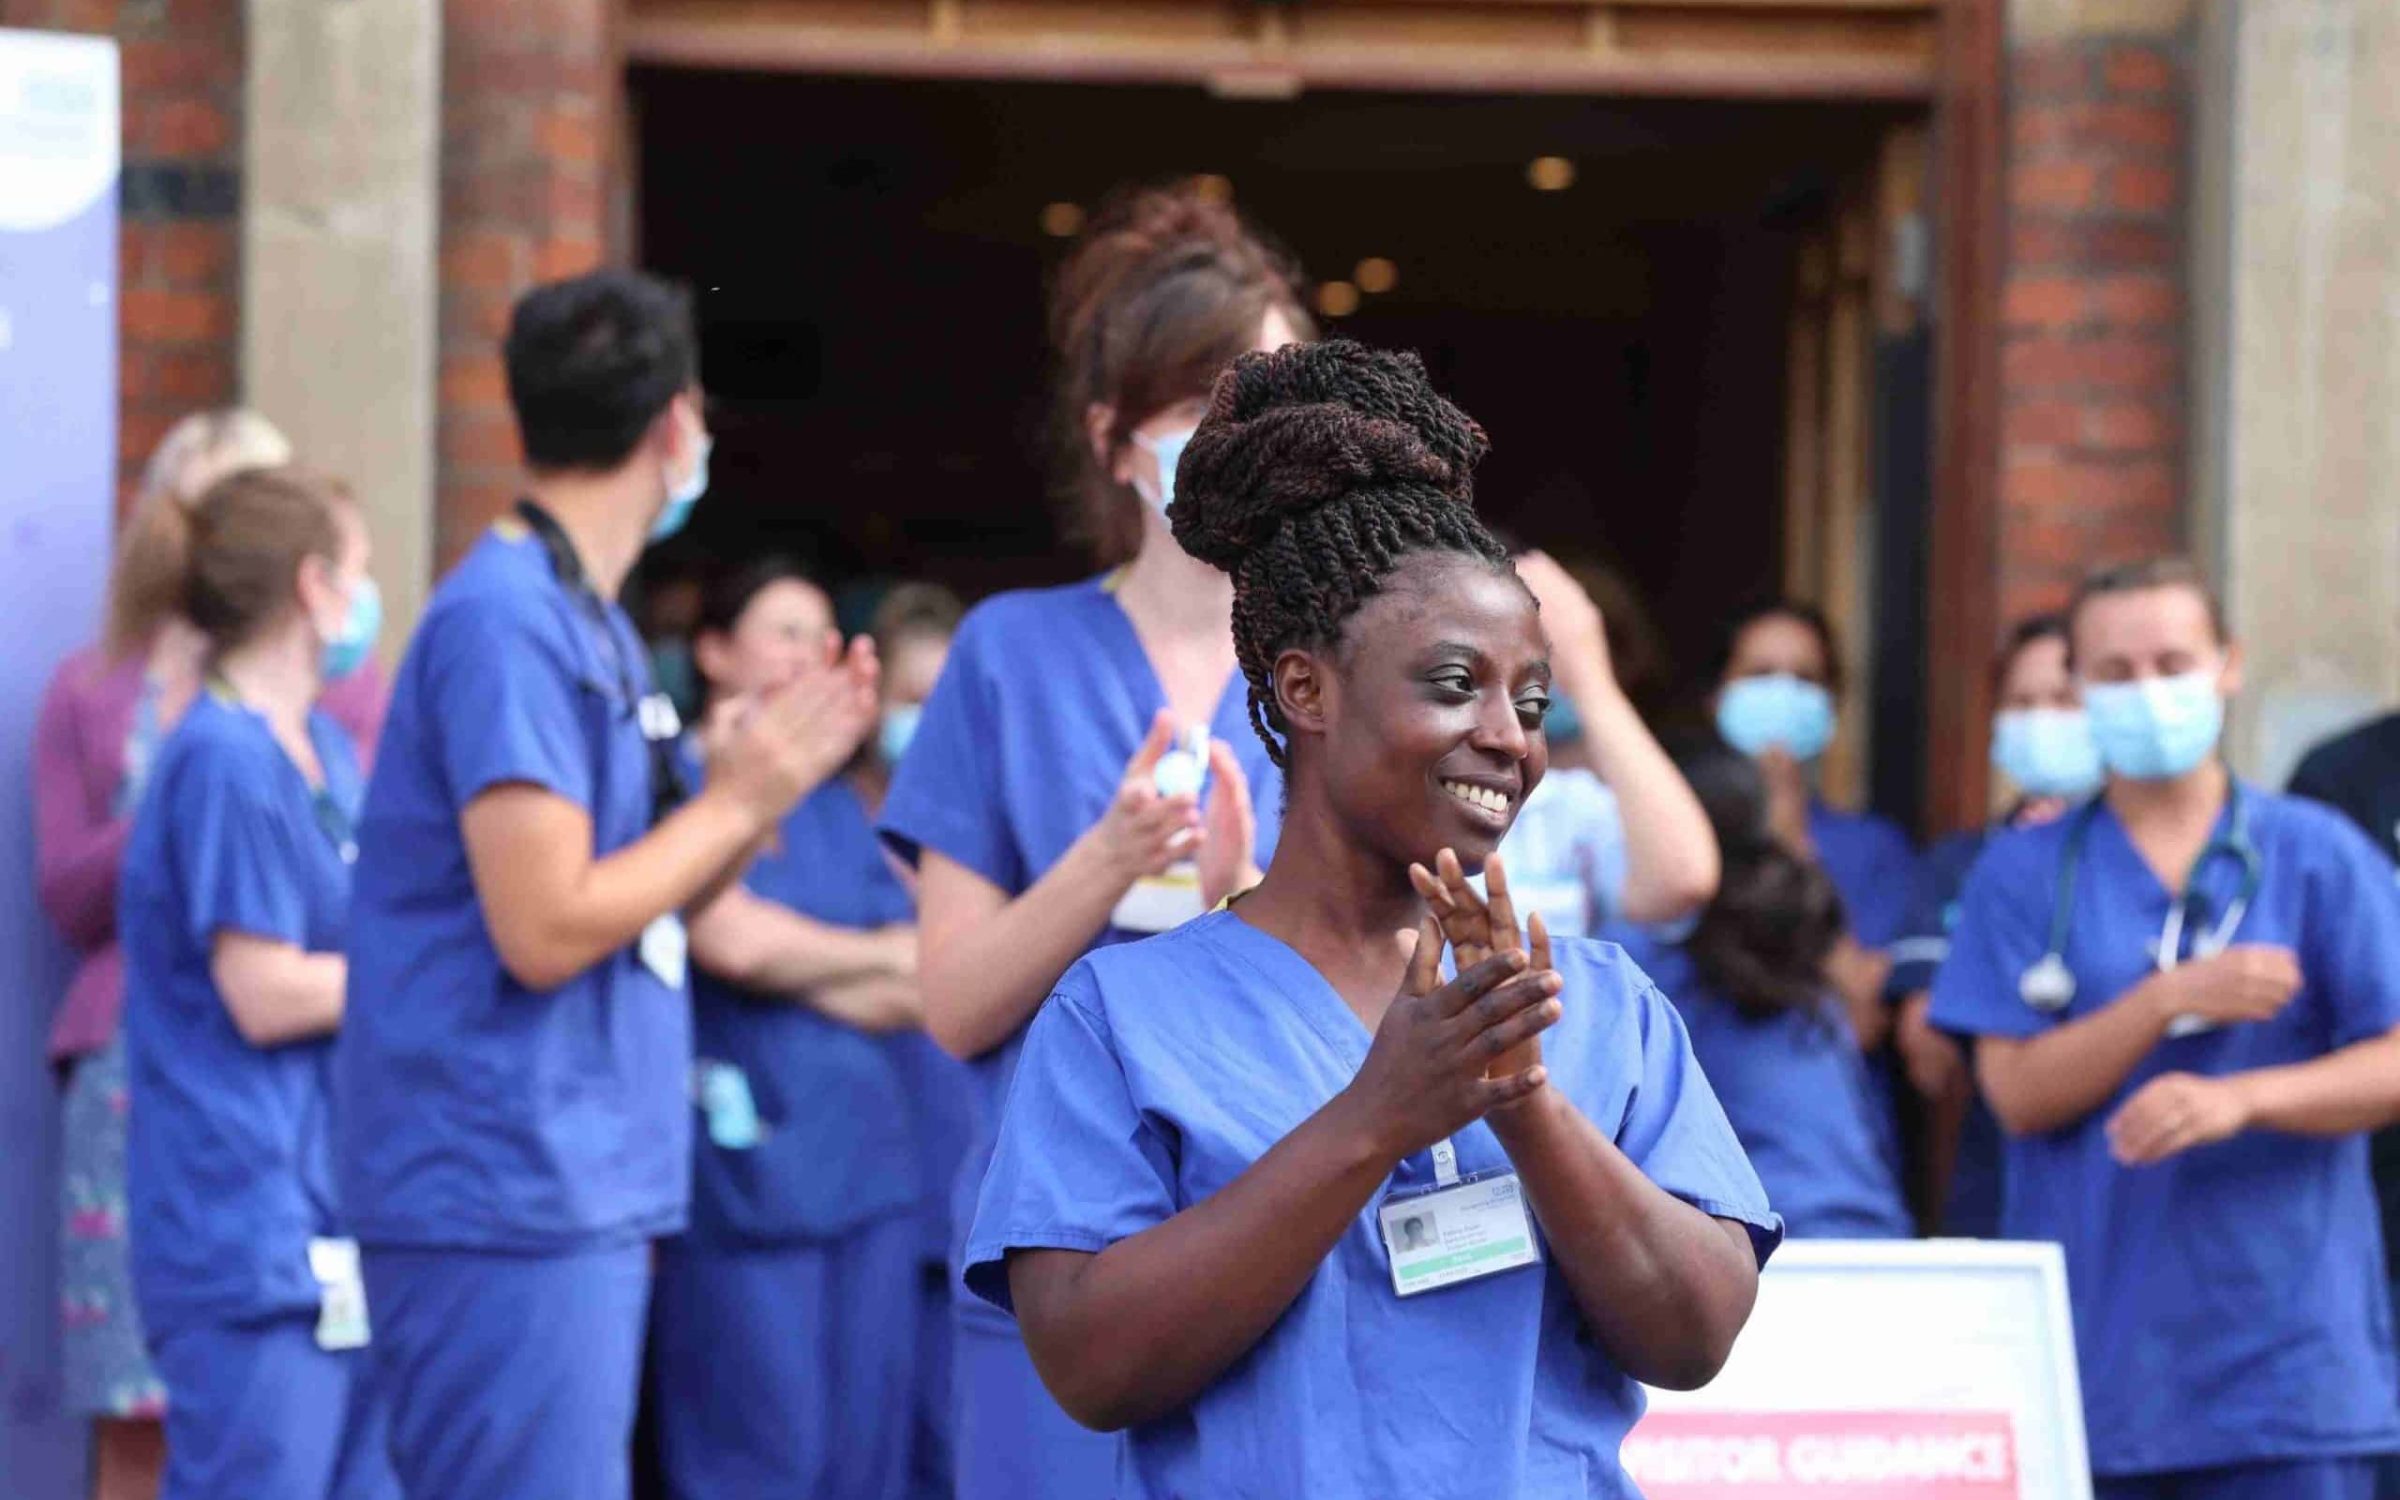 Winchester, Hampshire, UK. 5th July 2020. Clap for carers appreciation at Royal Hampshire County Hospital in Winchester, celebrating the 72nd anniversary of the NHS. Staff at the hospital took part in the applause, before singing happy birthday to the NHS.